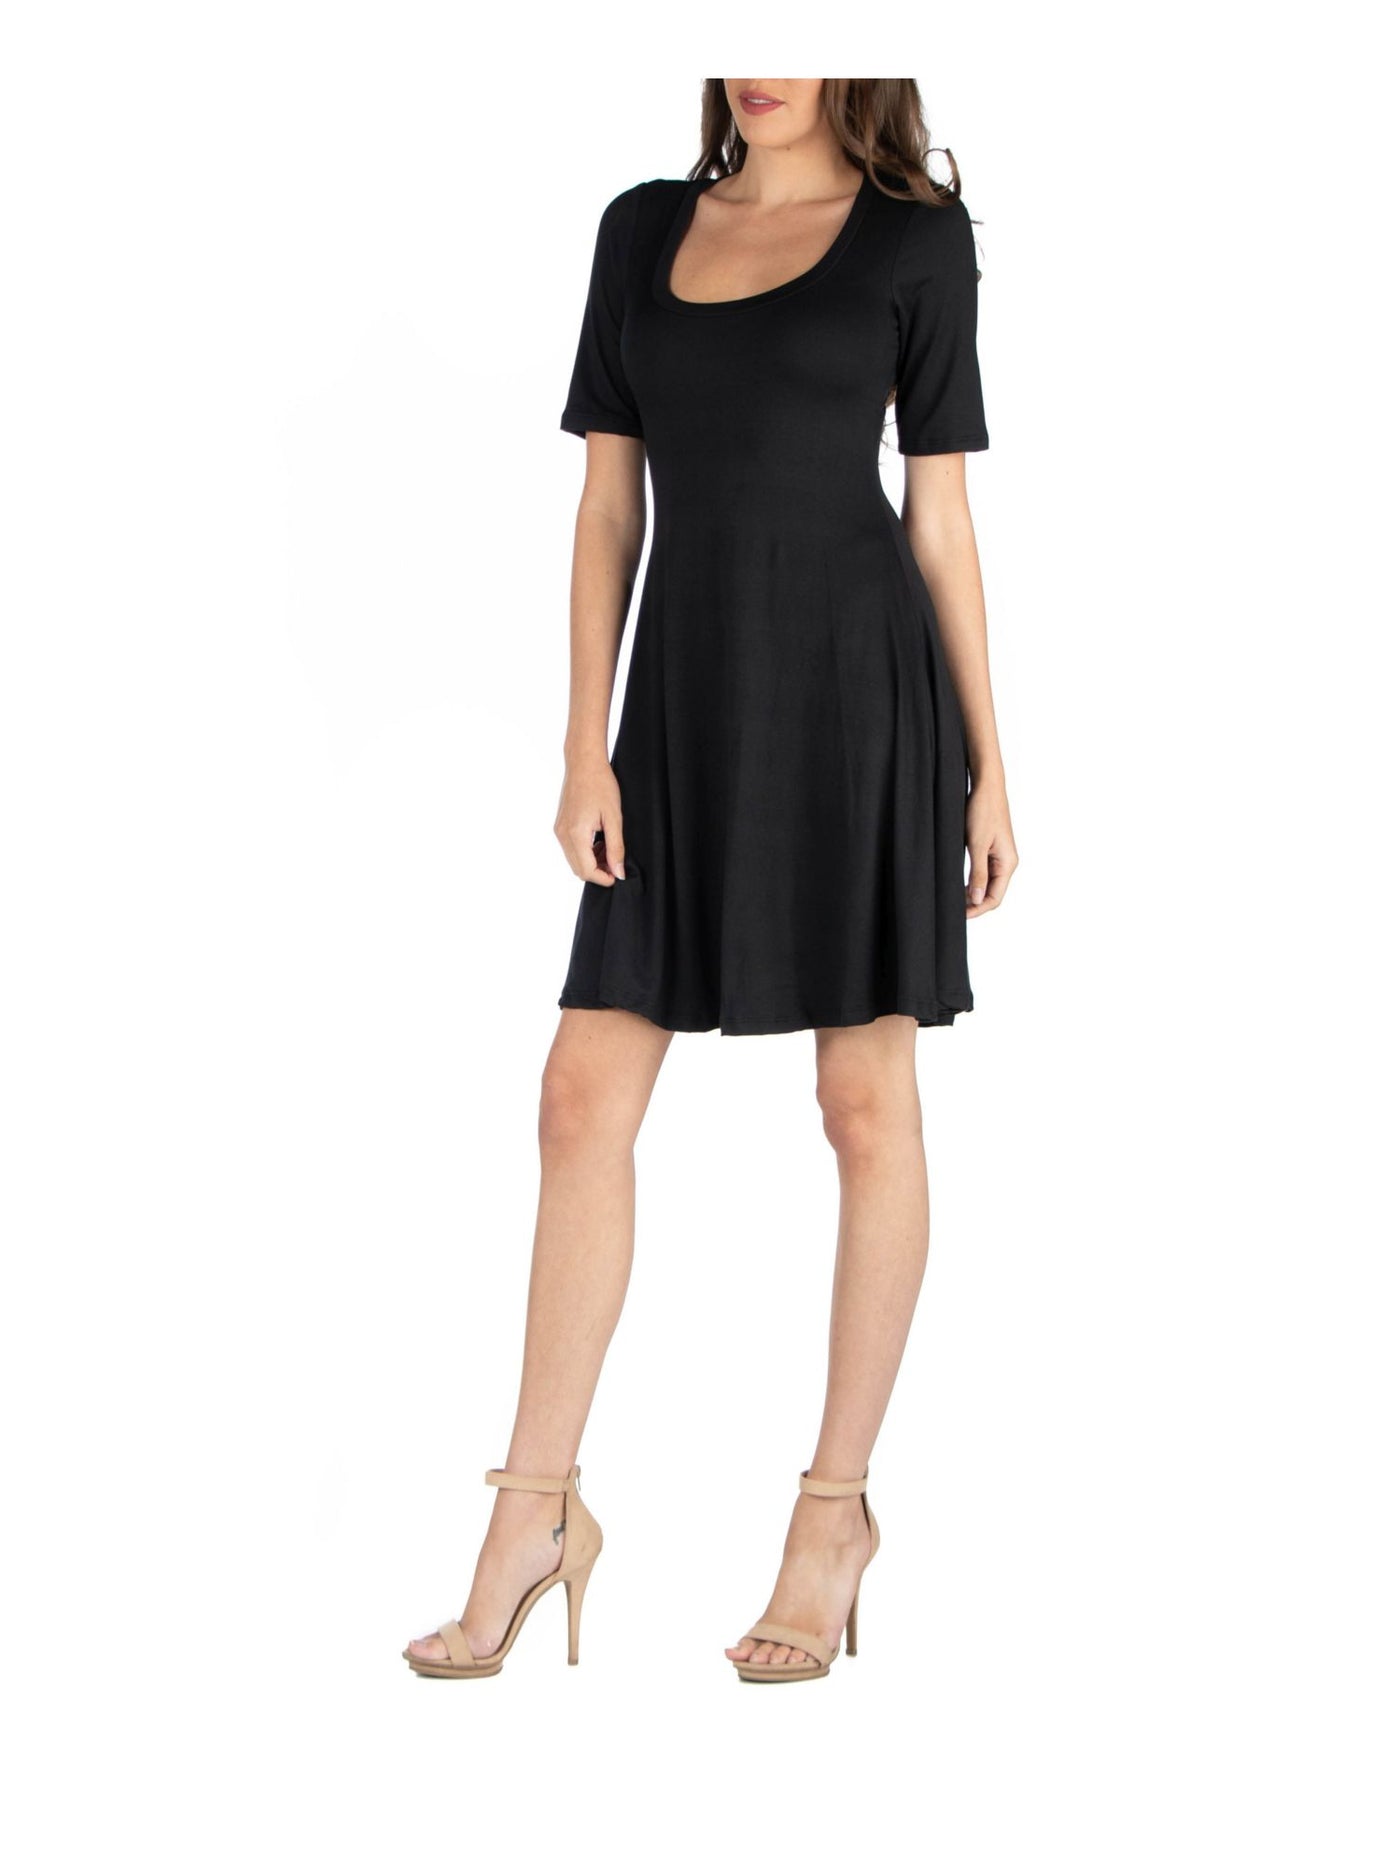 24 SEVEN COMFORT Womens Black Stretch Elbow Sleeve Scoop Neck Above The Knee Fit + Flare Dress S